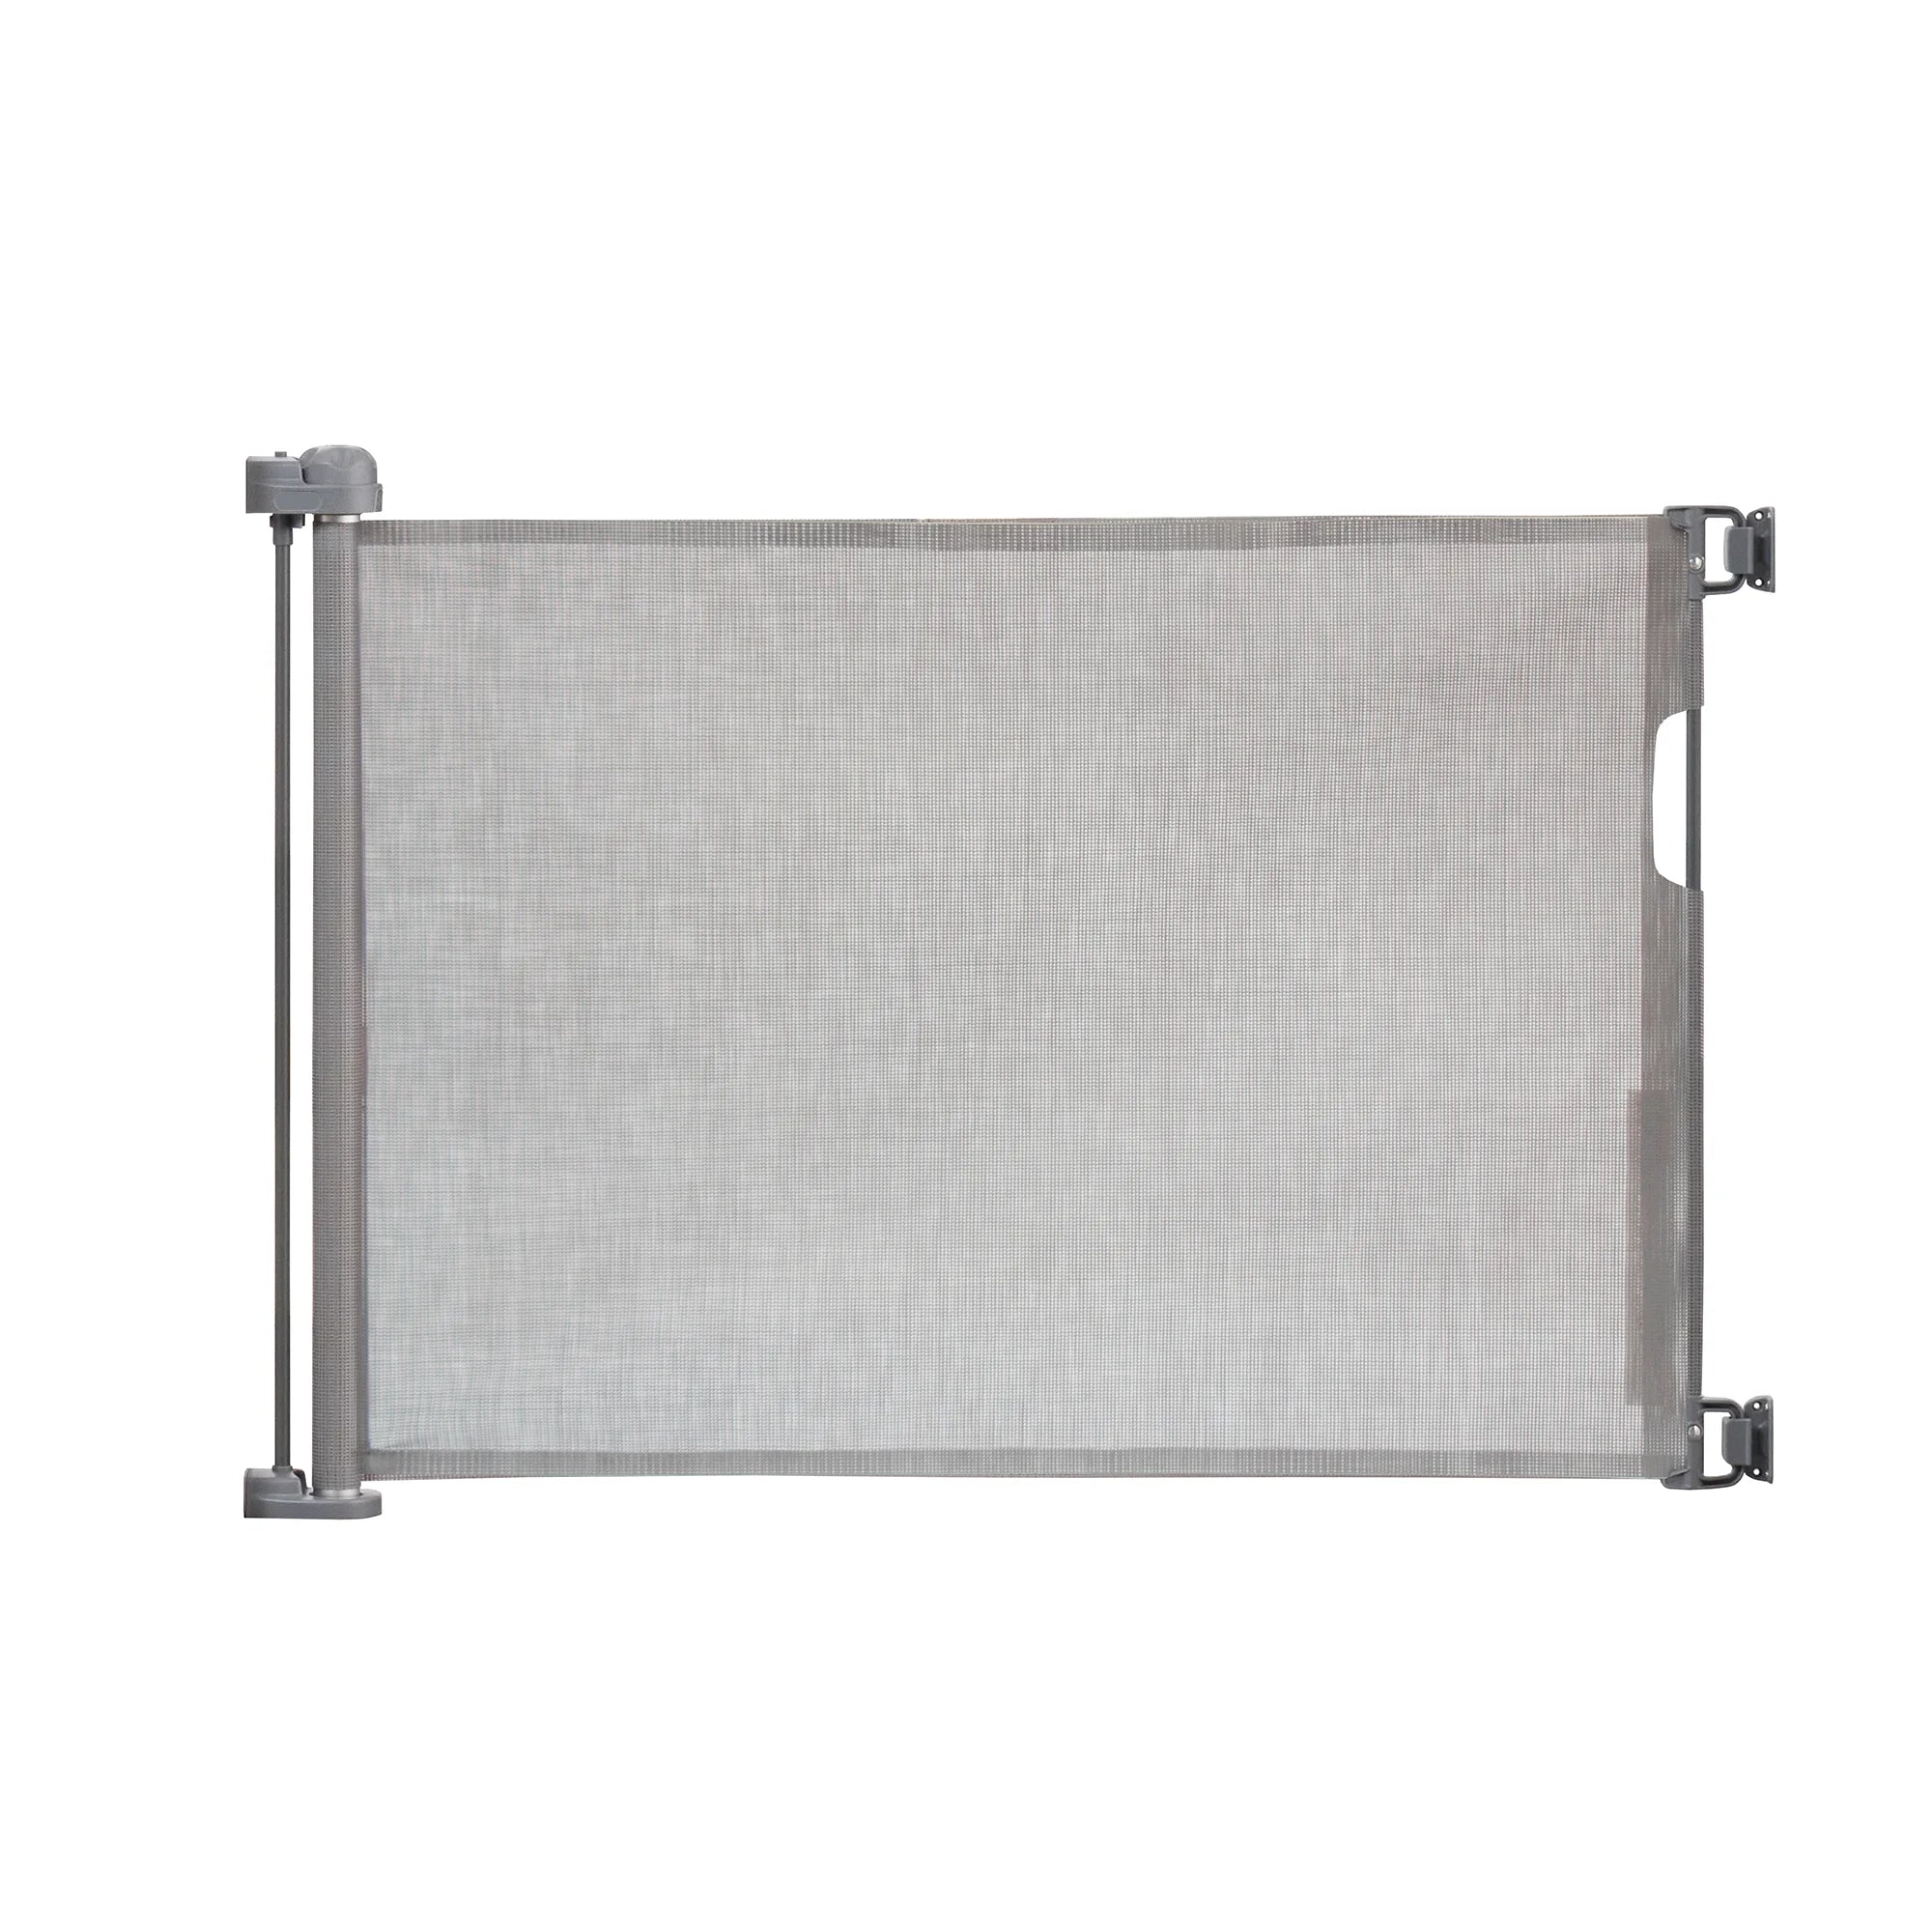 Retractable Pet Gate on white background.